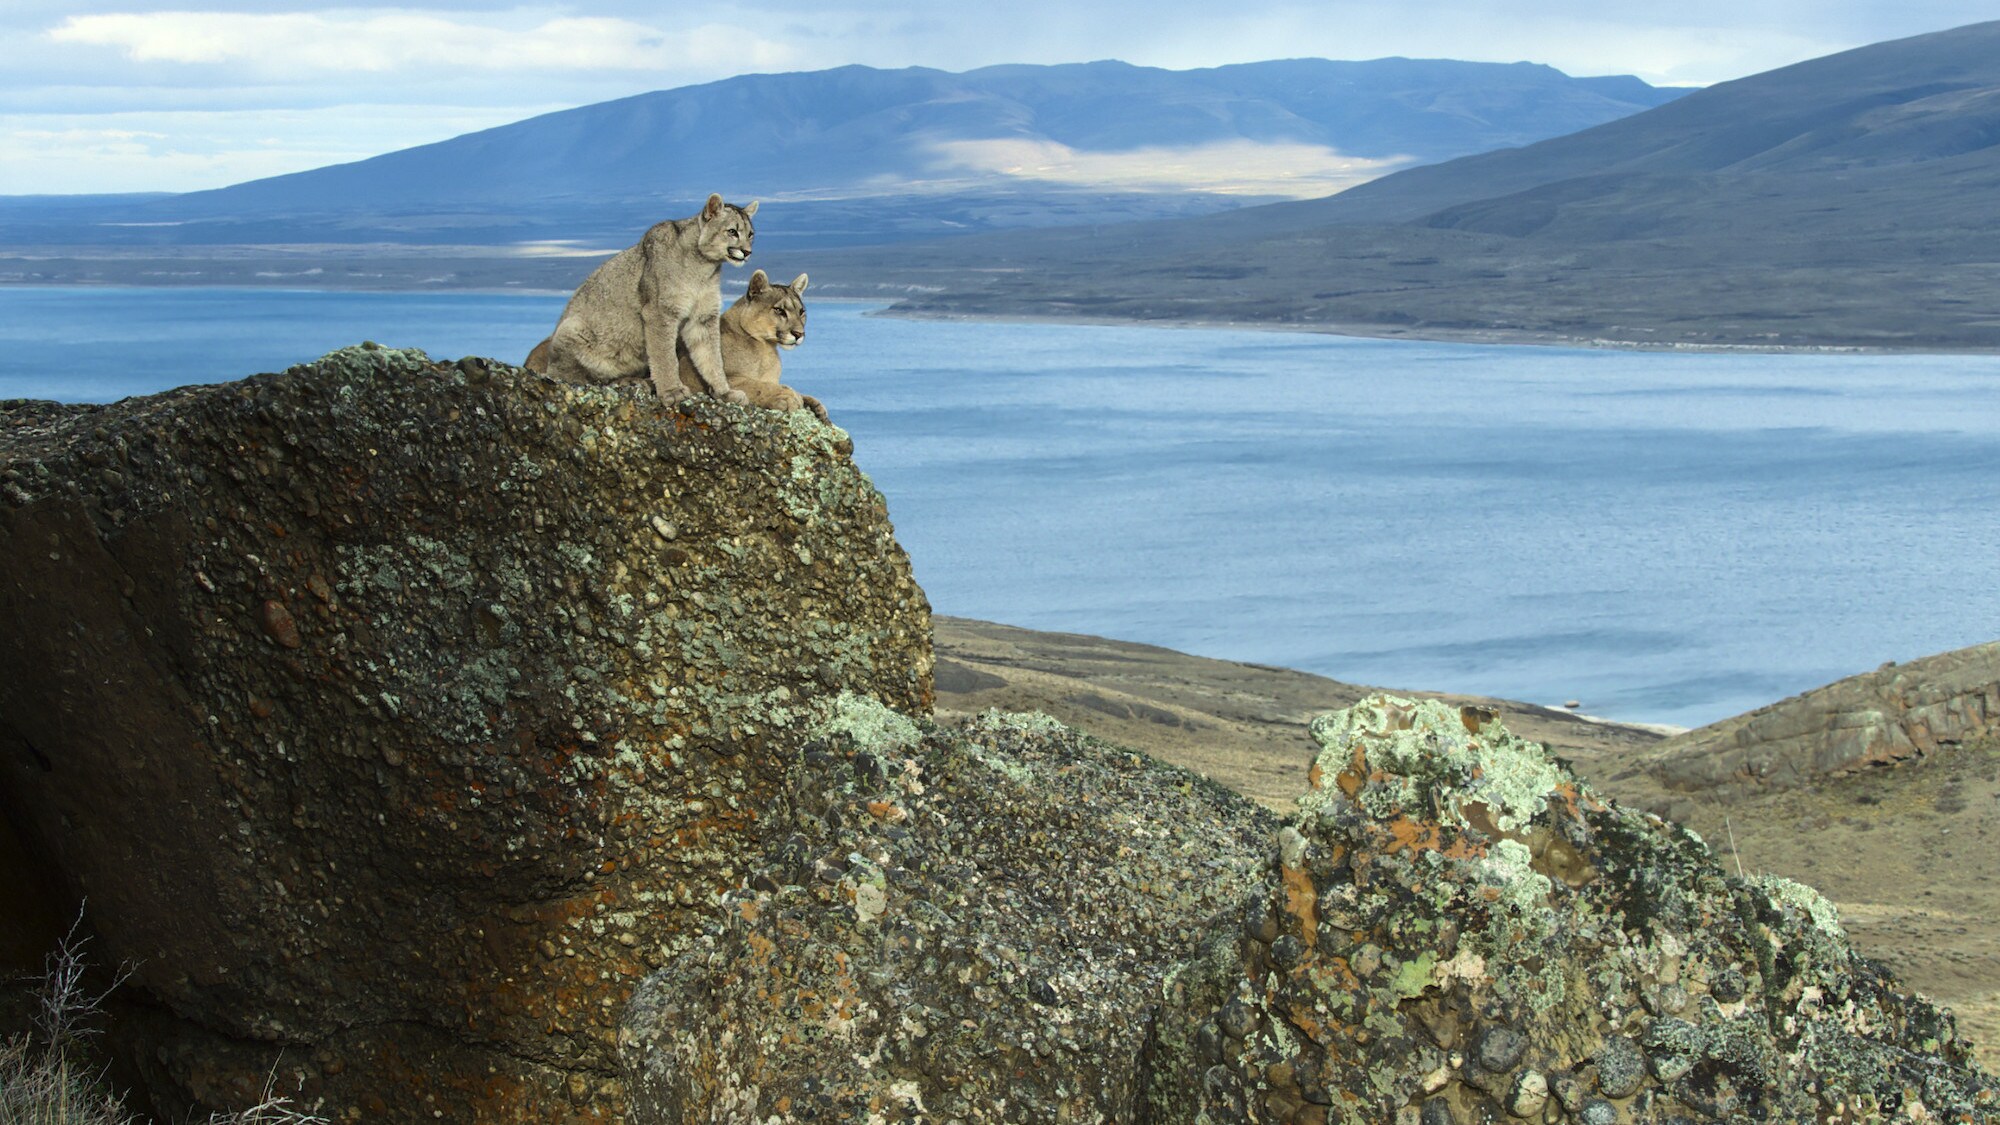 Two Pumas sitting on a rock looking out.  (National Geographic for Disney+/Sam Stewart)